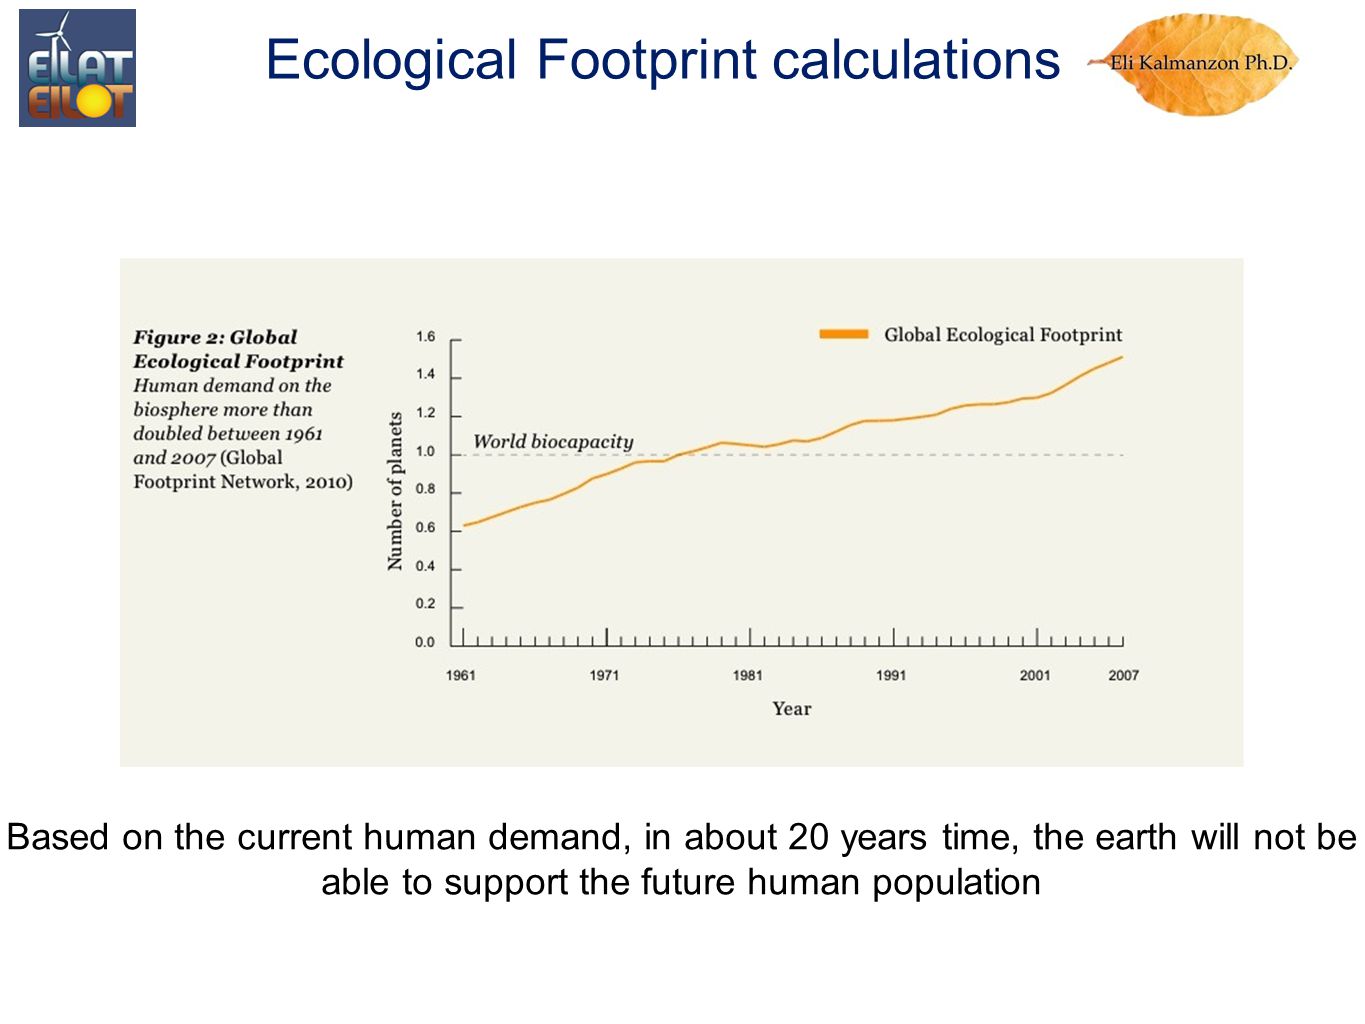 Based on the current human demand, in about 20 years time, the earth will not be able to support the future human population Ecological Footprint calculations